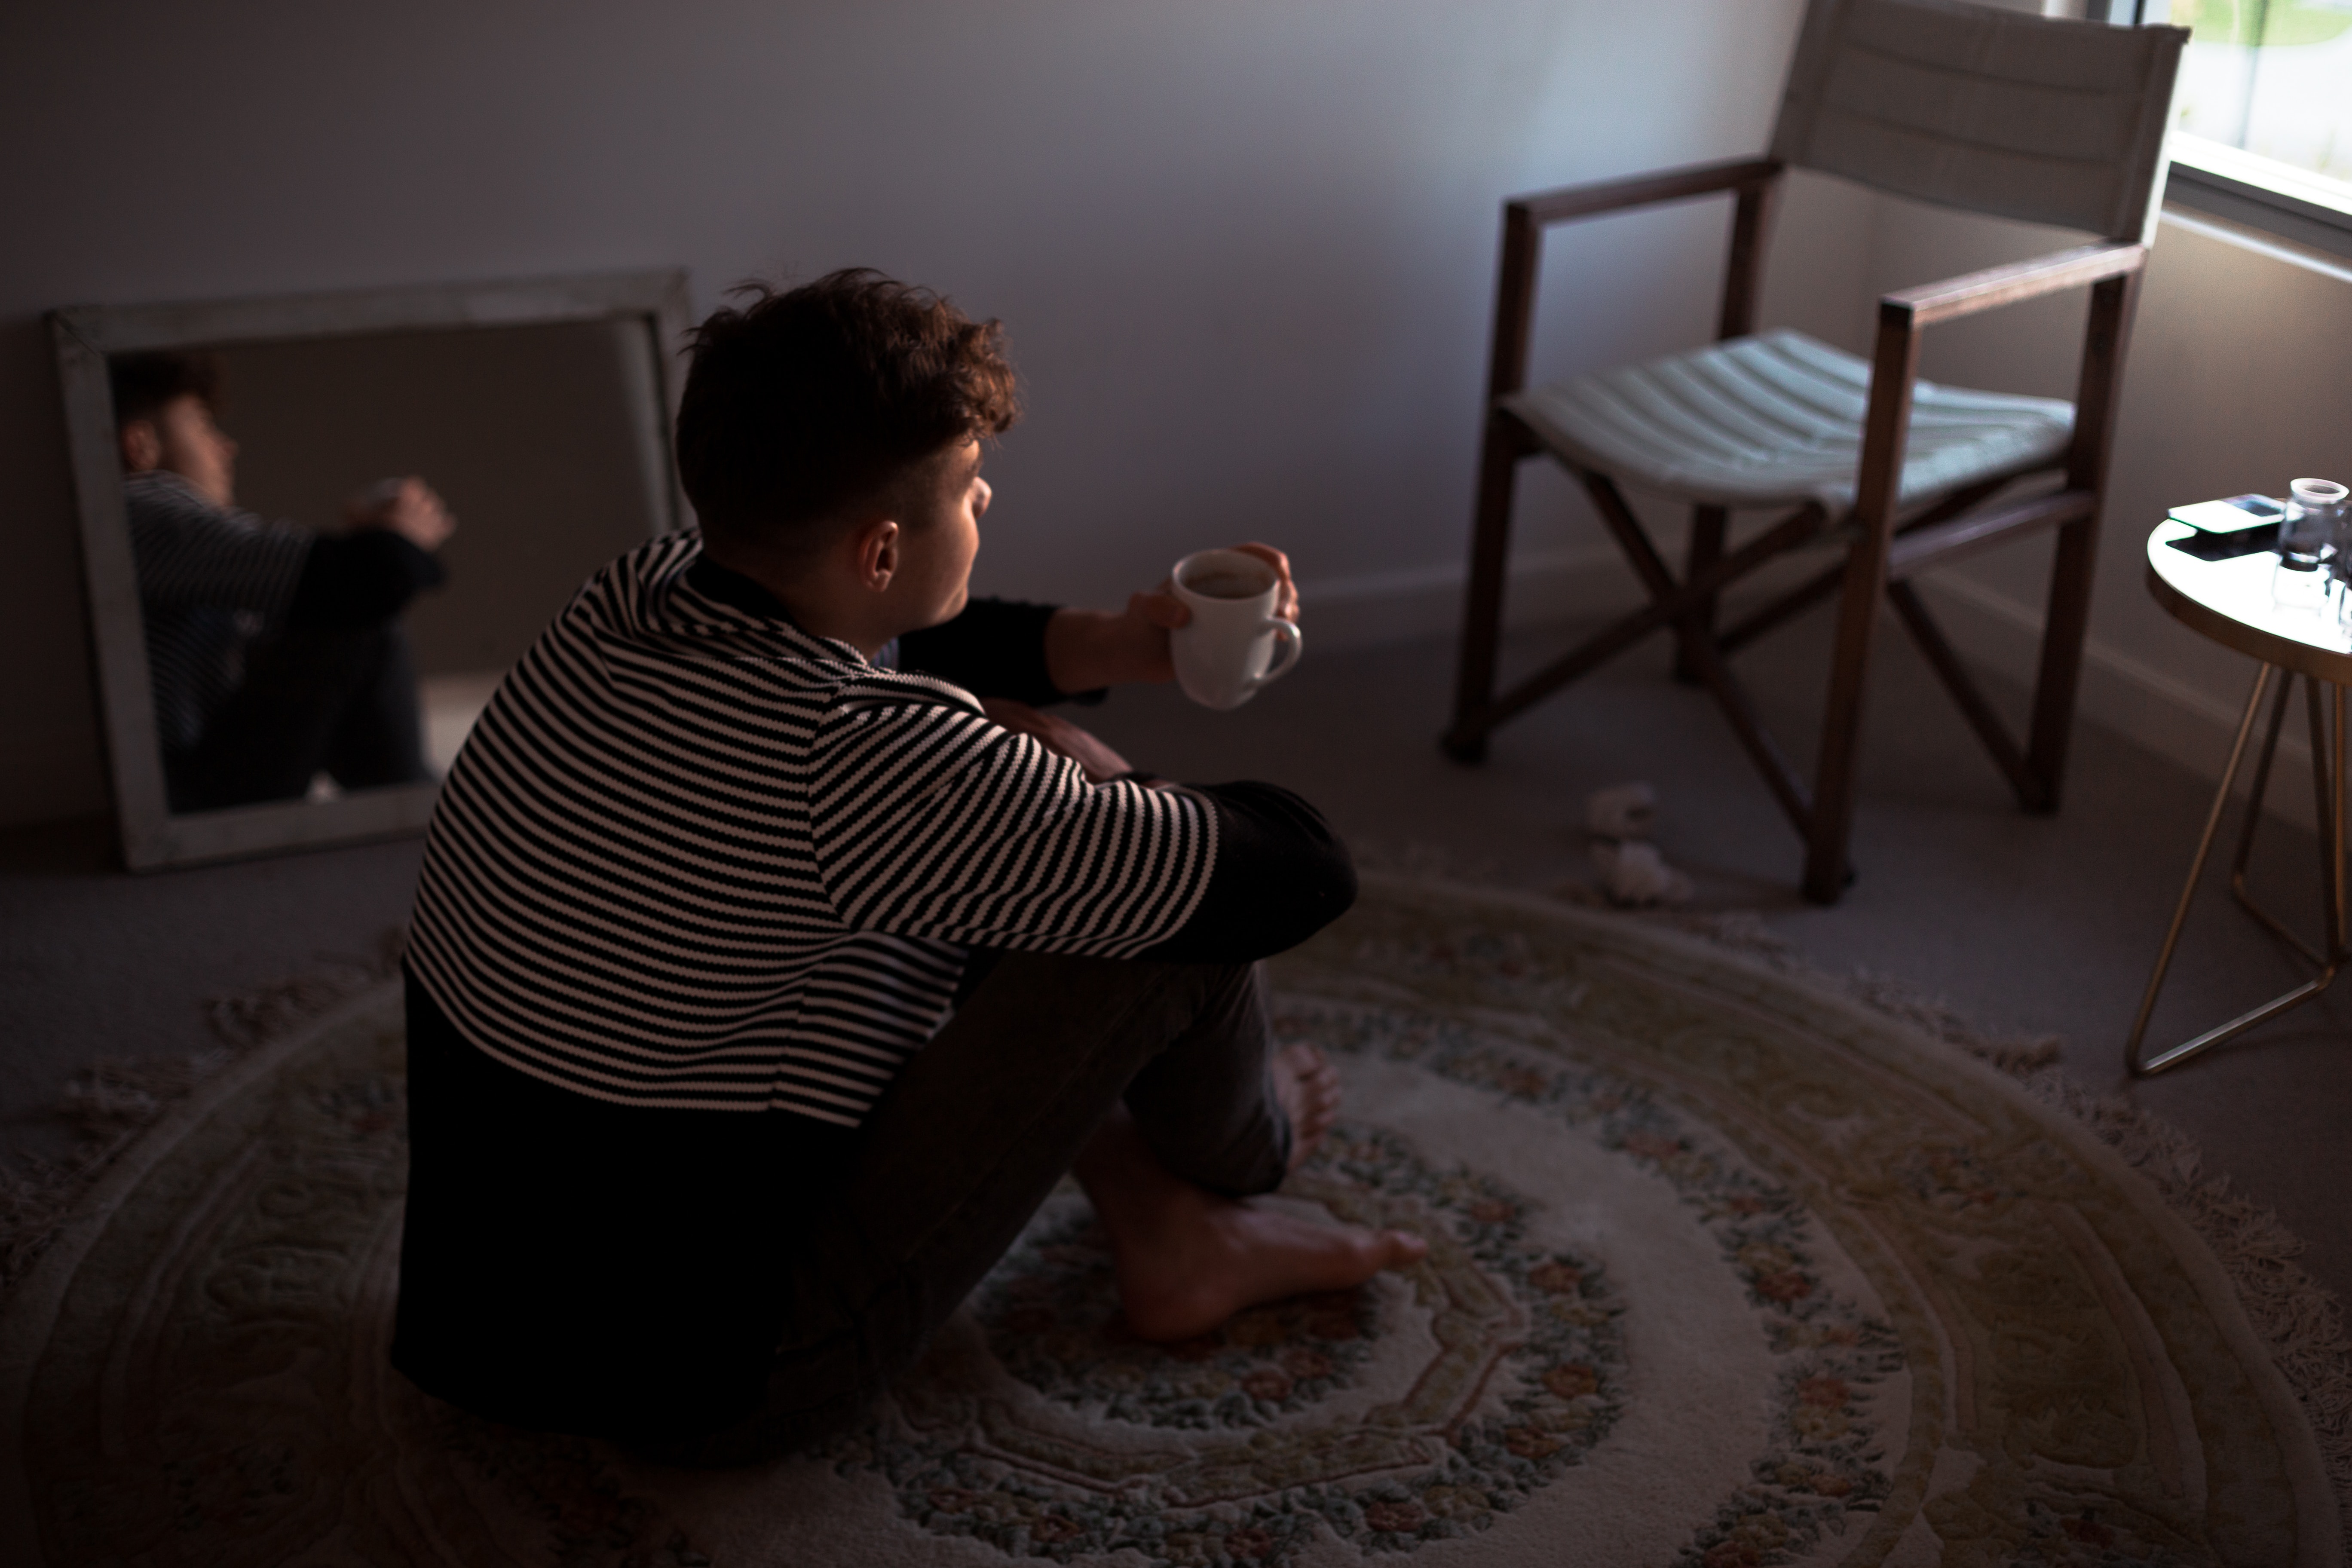 A young man sits barefoot on a circular rug with a mirror beside him and a chair and side table in front of him. He looks out of the window ahead while holding a cup and looking somewhat pensive.